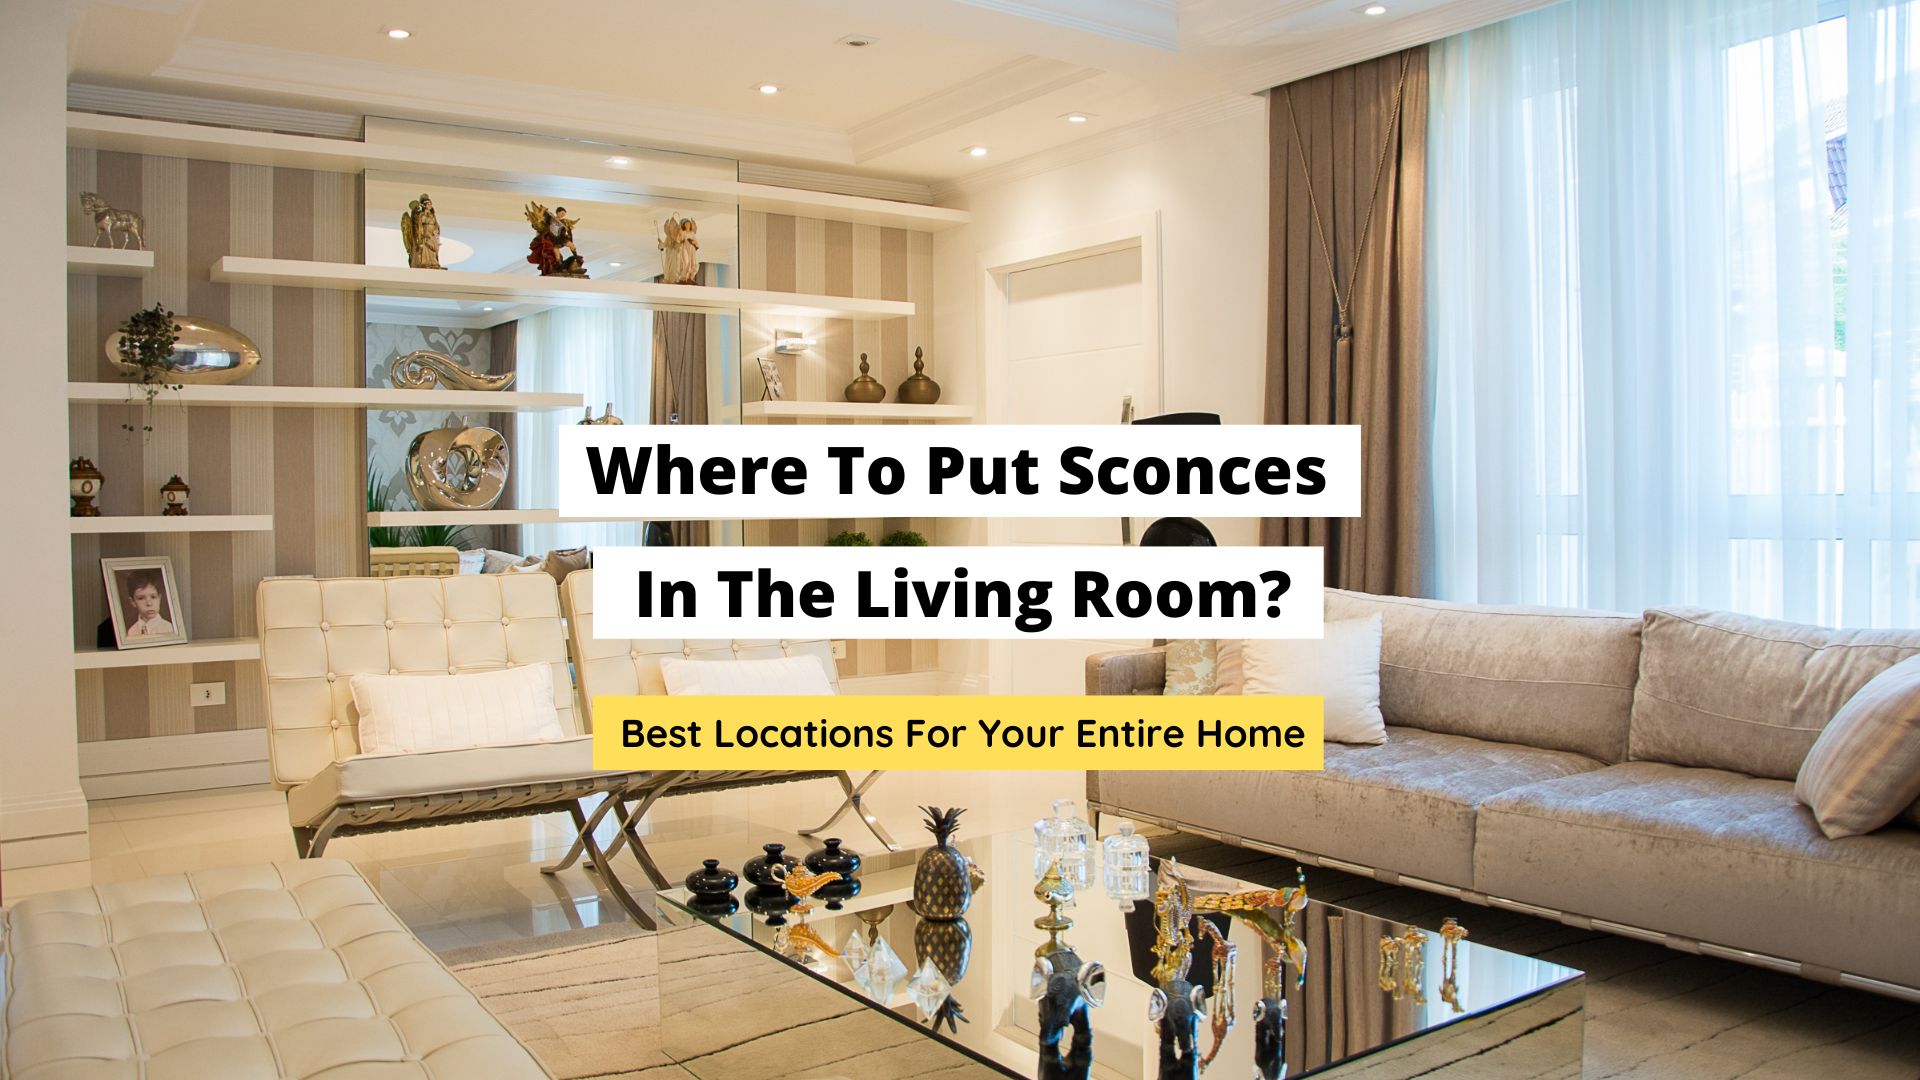 Where To Put Sconces In The Living Room